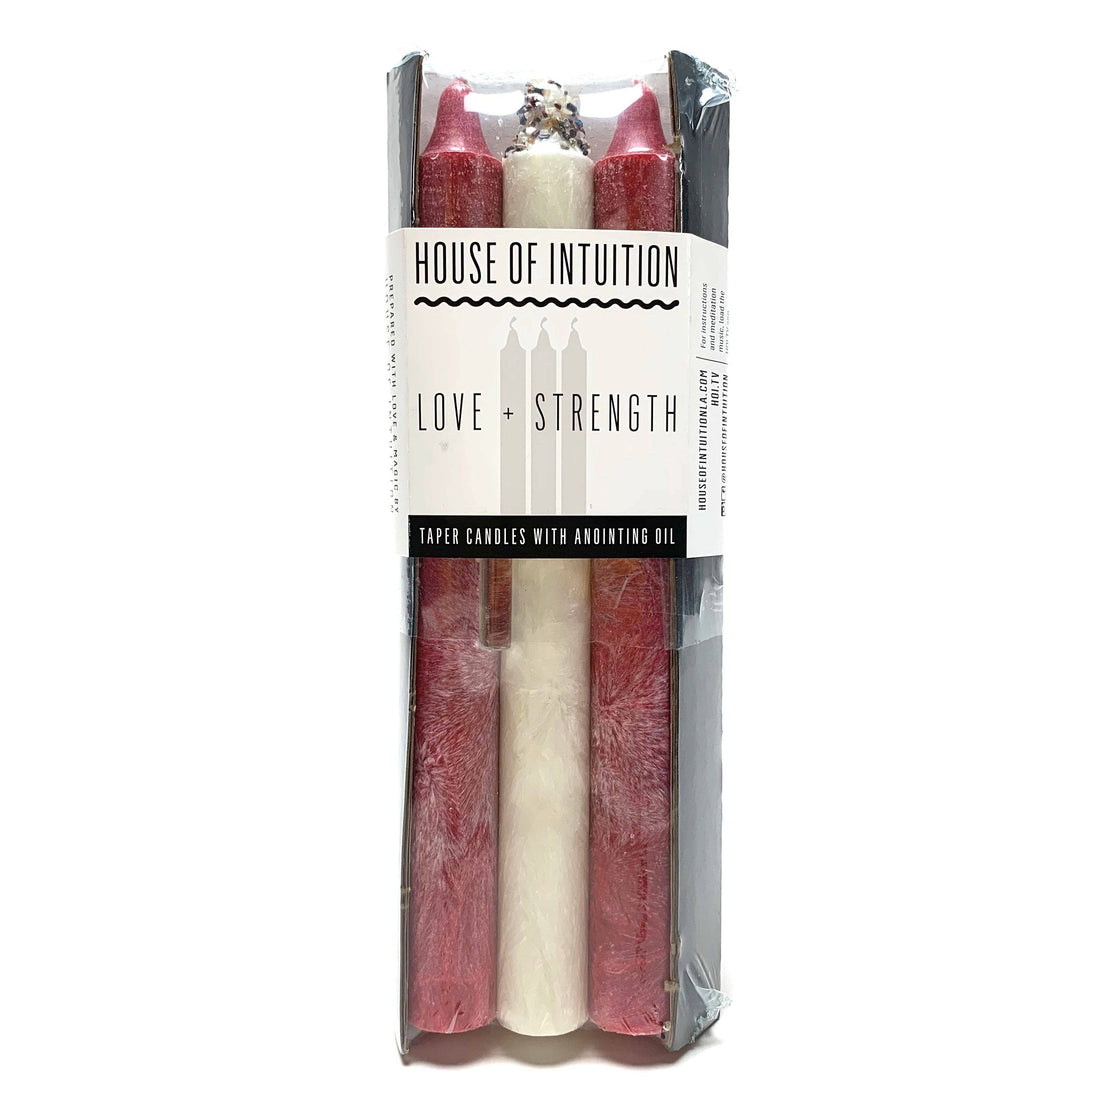 Taper Intention Candle Set - Love and Strength Taper Intention Candles House of Intuition 